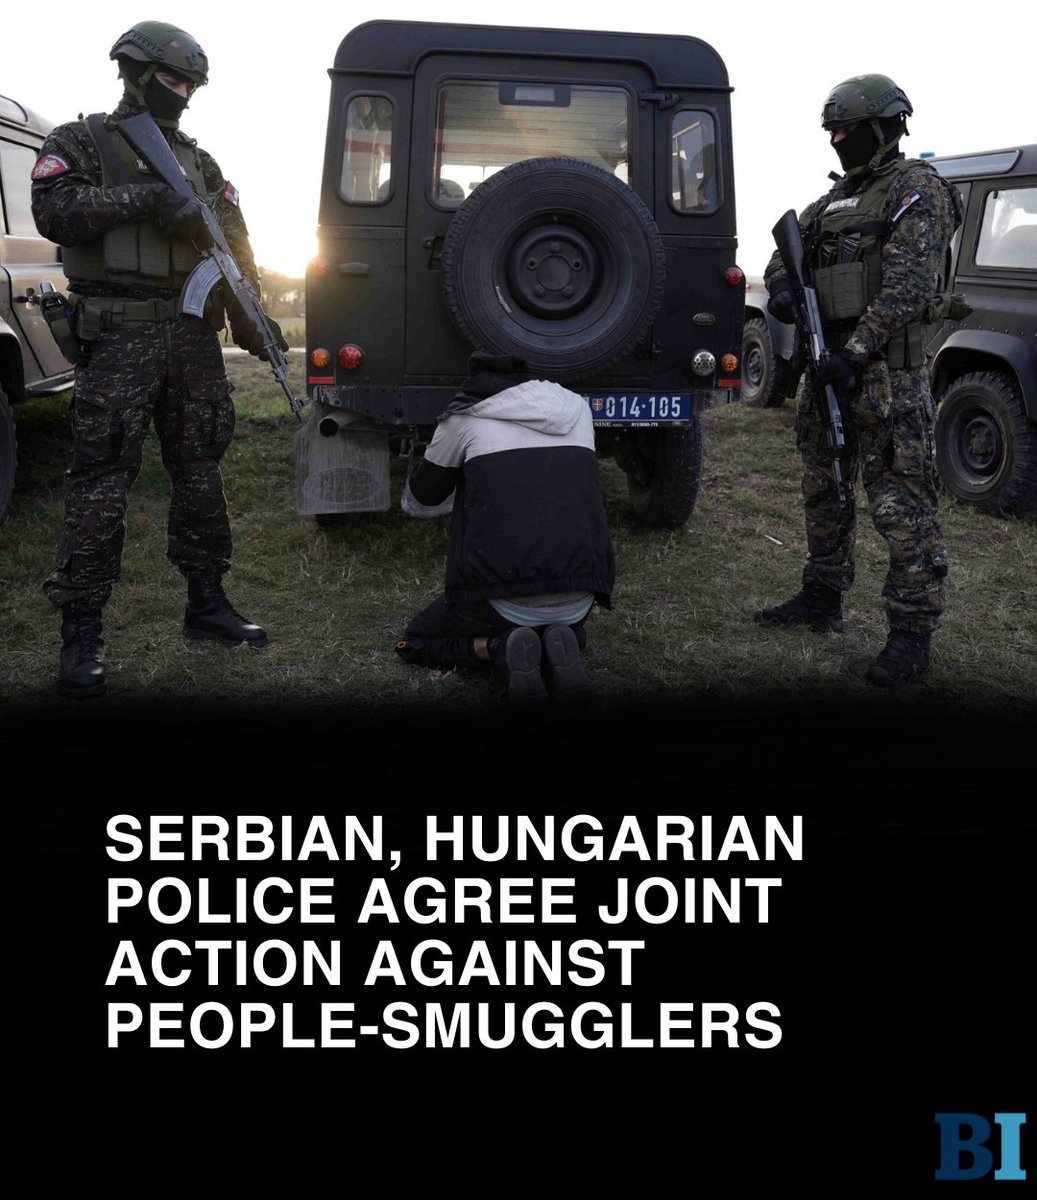 After three people were killed in armed clashes between people-smugglers, Serbian and Hungarian police agreed to work together in the Serbia-Hungary border area to tackle the criminal gangs involved